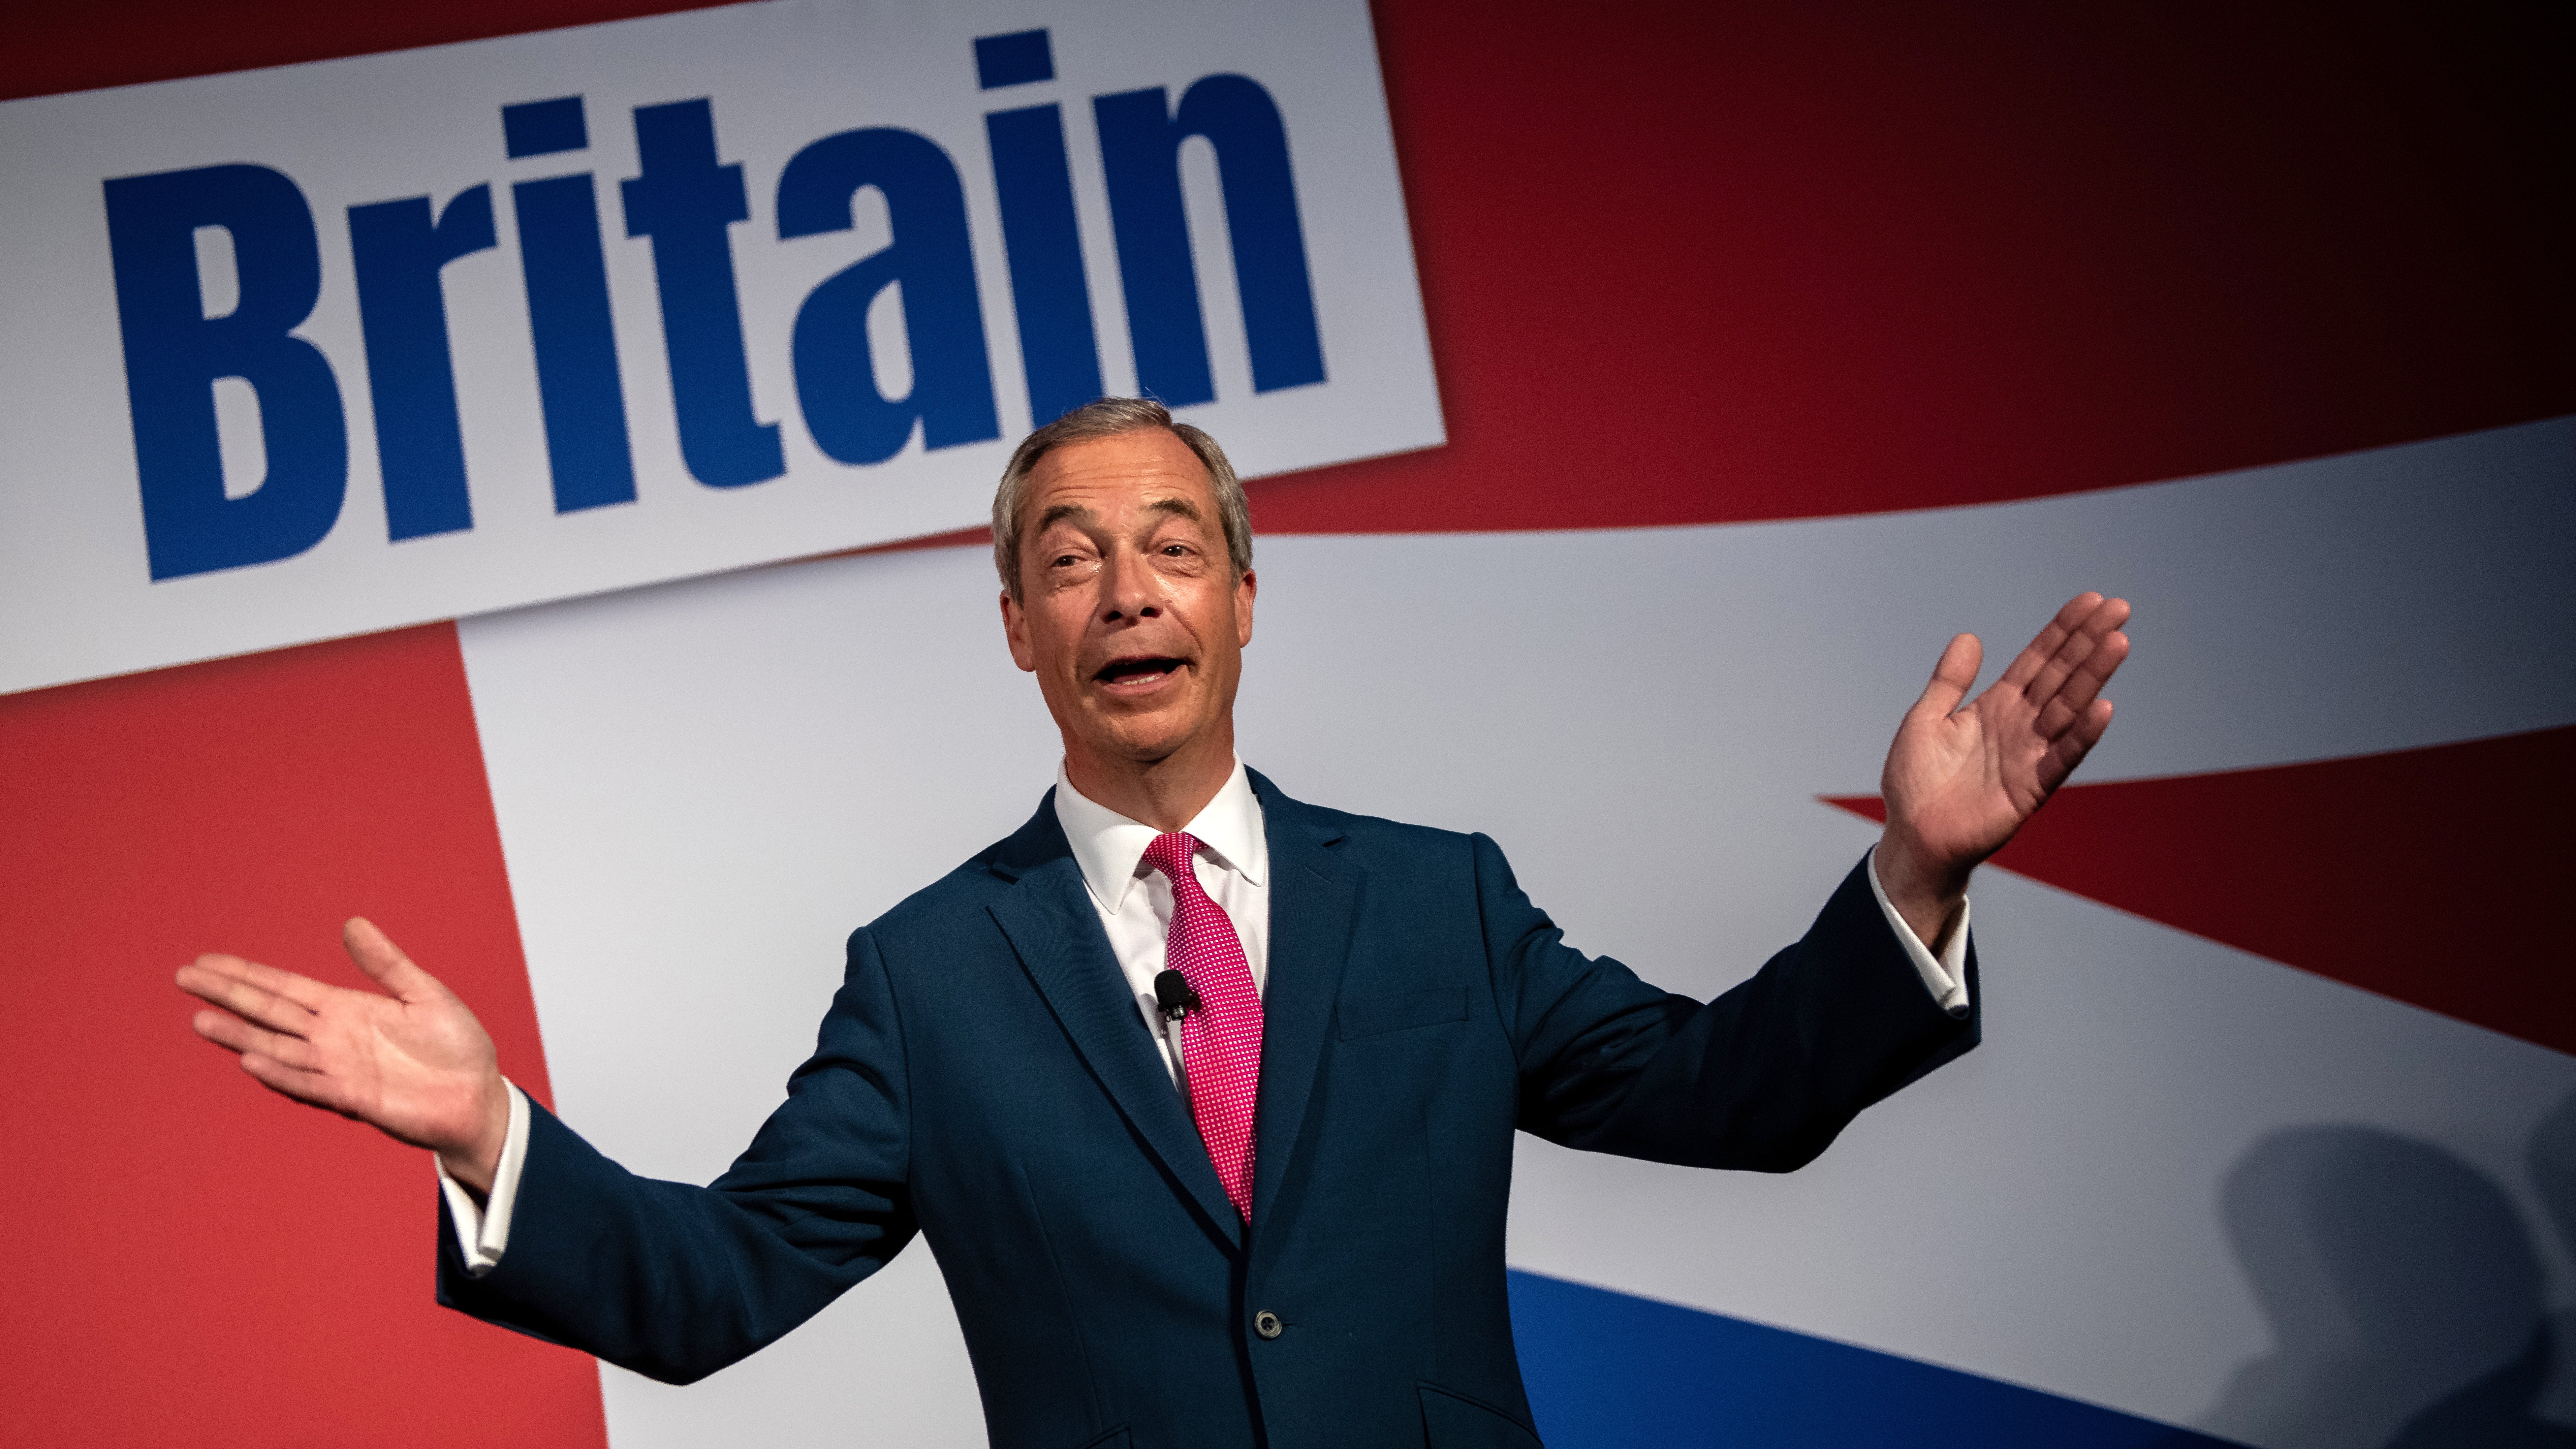 ‘If we had a saner voting system, Nigel Farage would almost certainly have been an MP already’